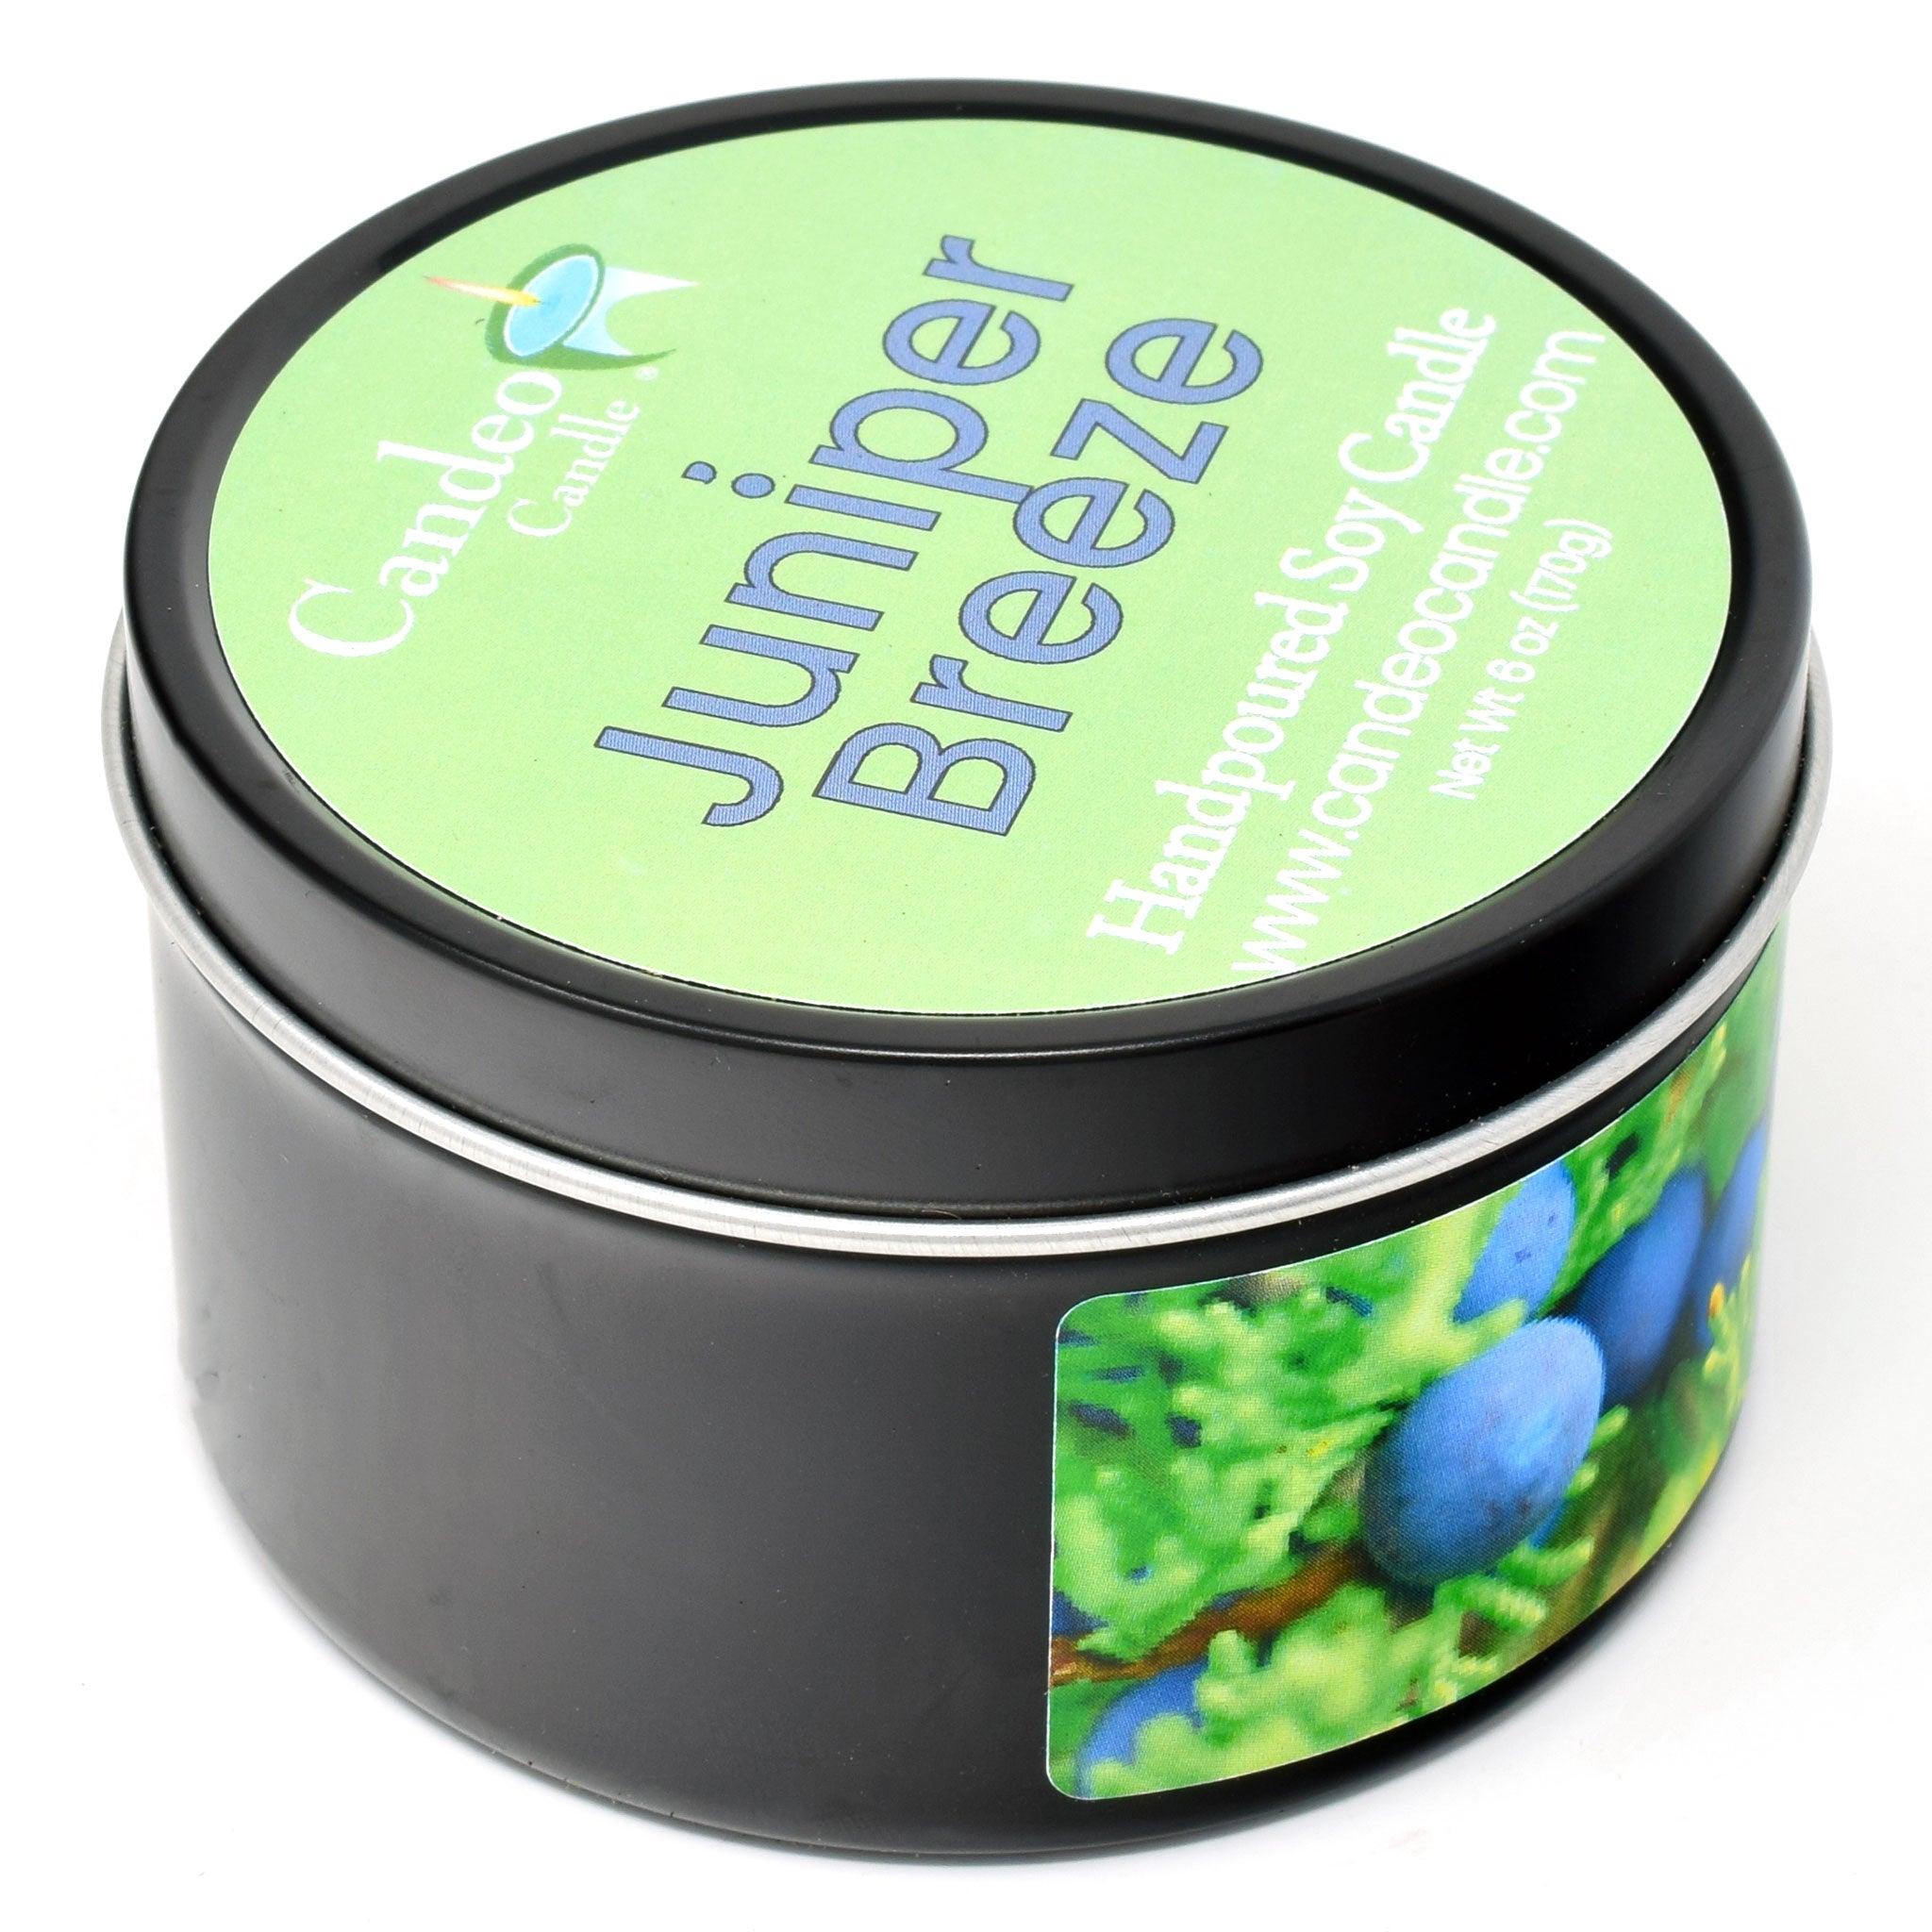 Juniper Breeze, 6oz Soy Candle Tin - Candeo Candle